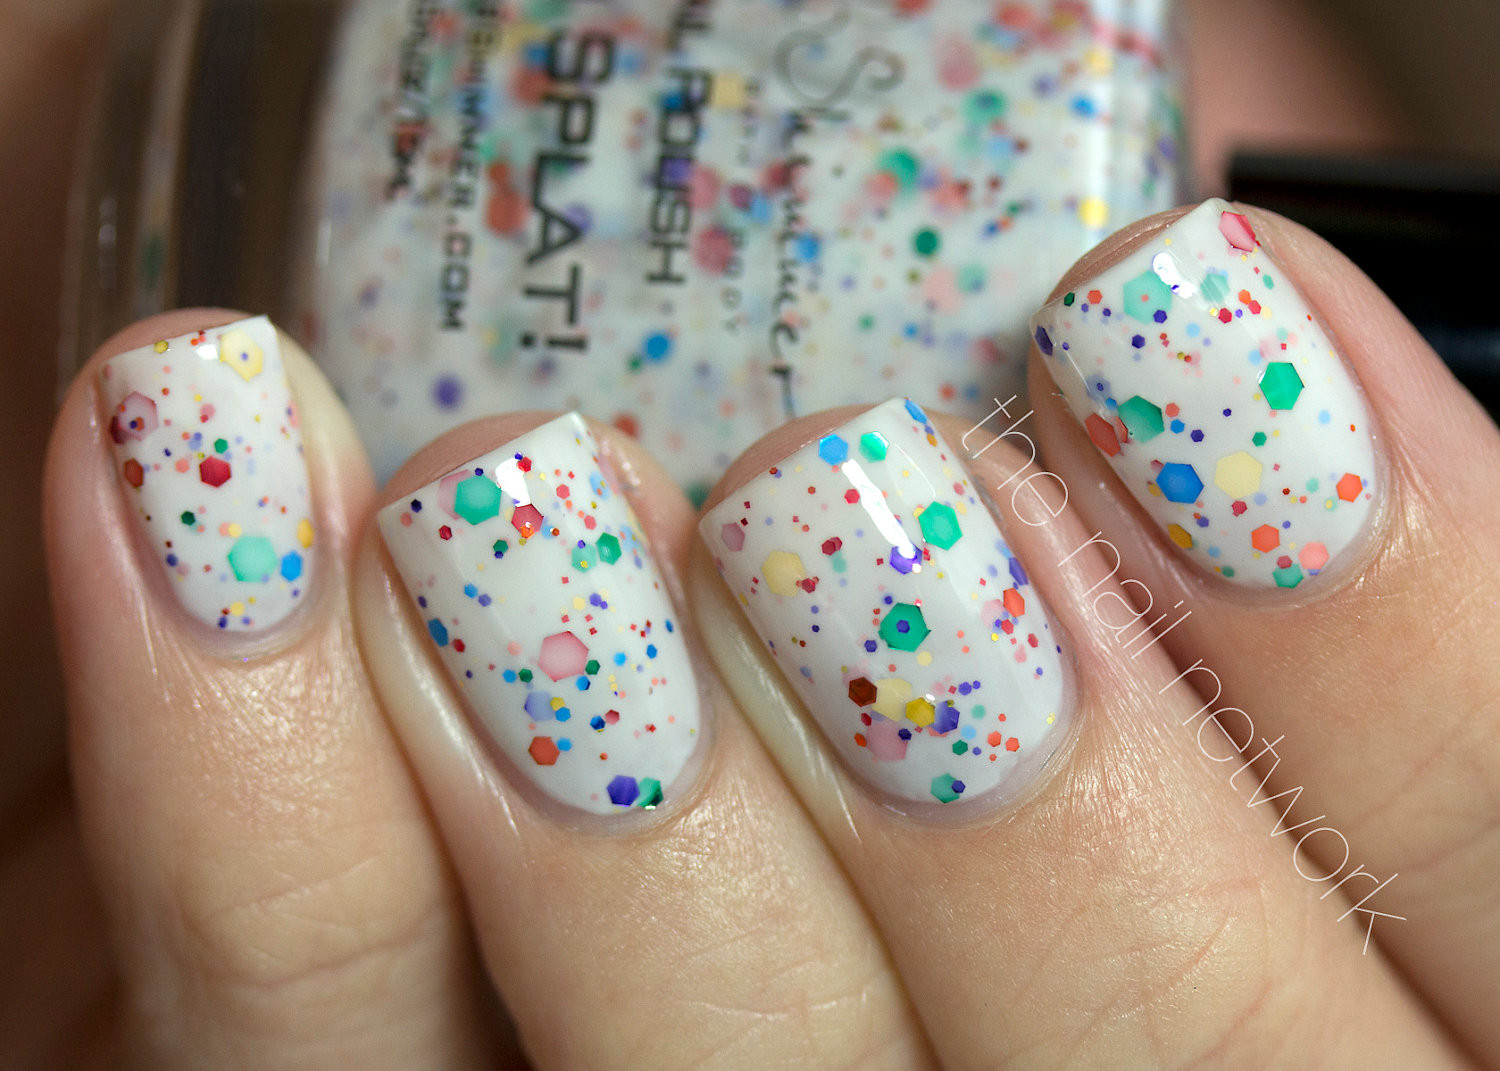 Glitter Nail Colors
 Oh Splat White Glitter Nail Polish with Rainbow by KBShimmer